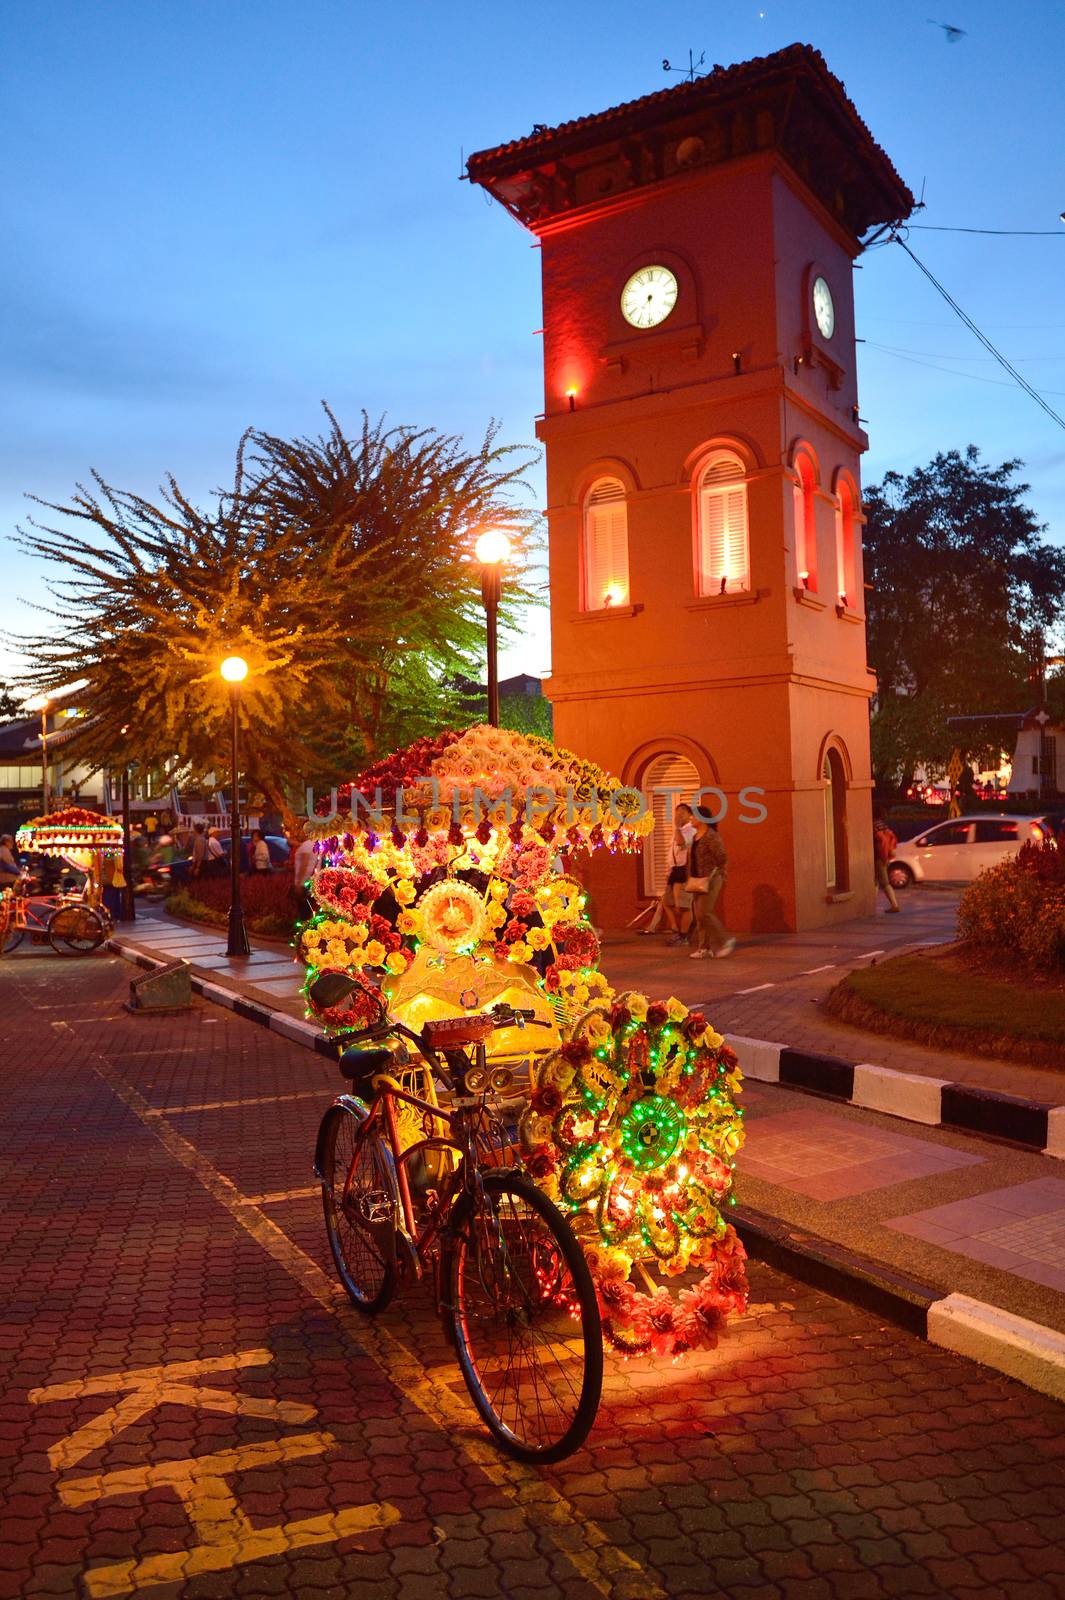 MALACCA, MALAYSIA - MAY 19: A view of Christ Church & Dutch Squa by think4photop